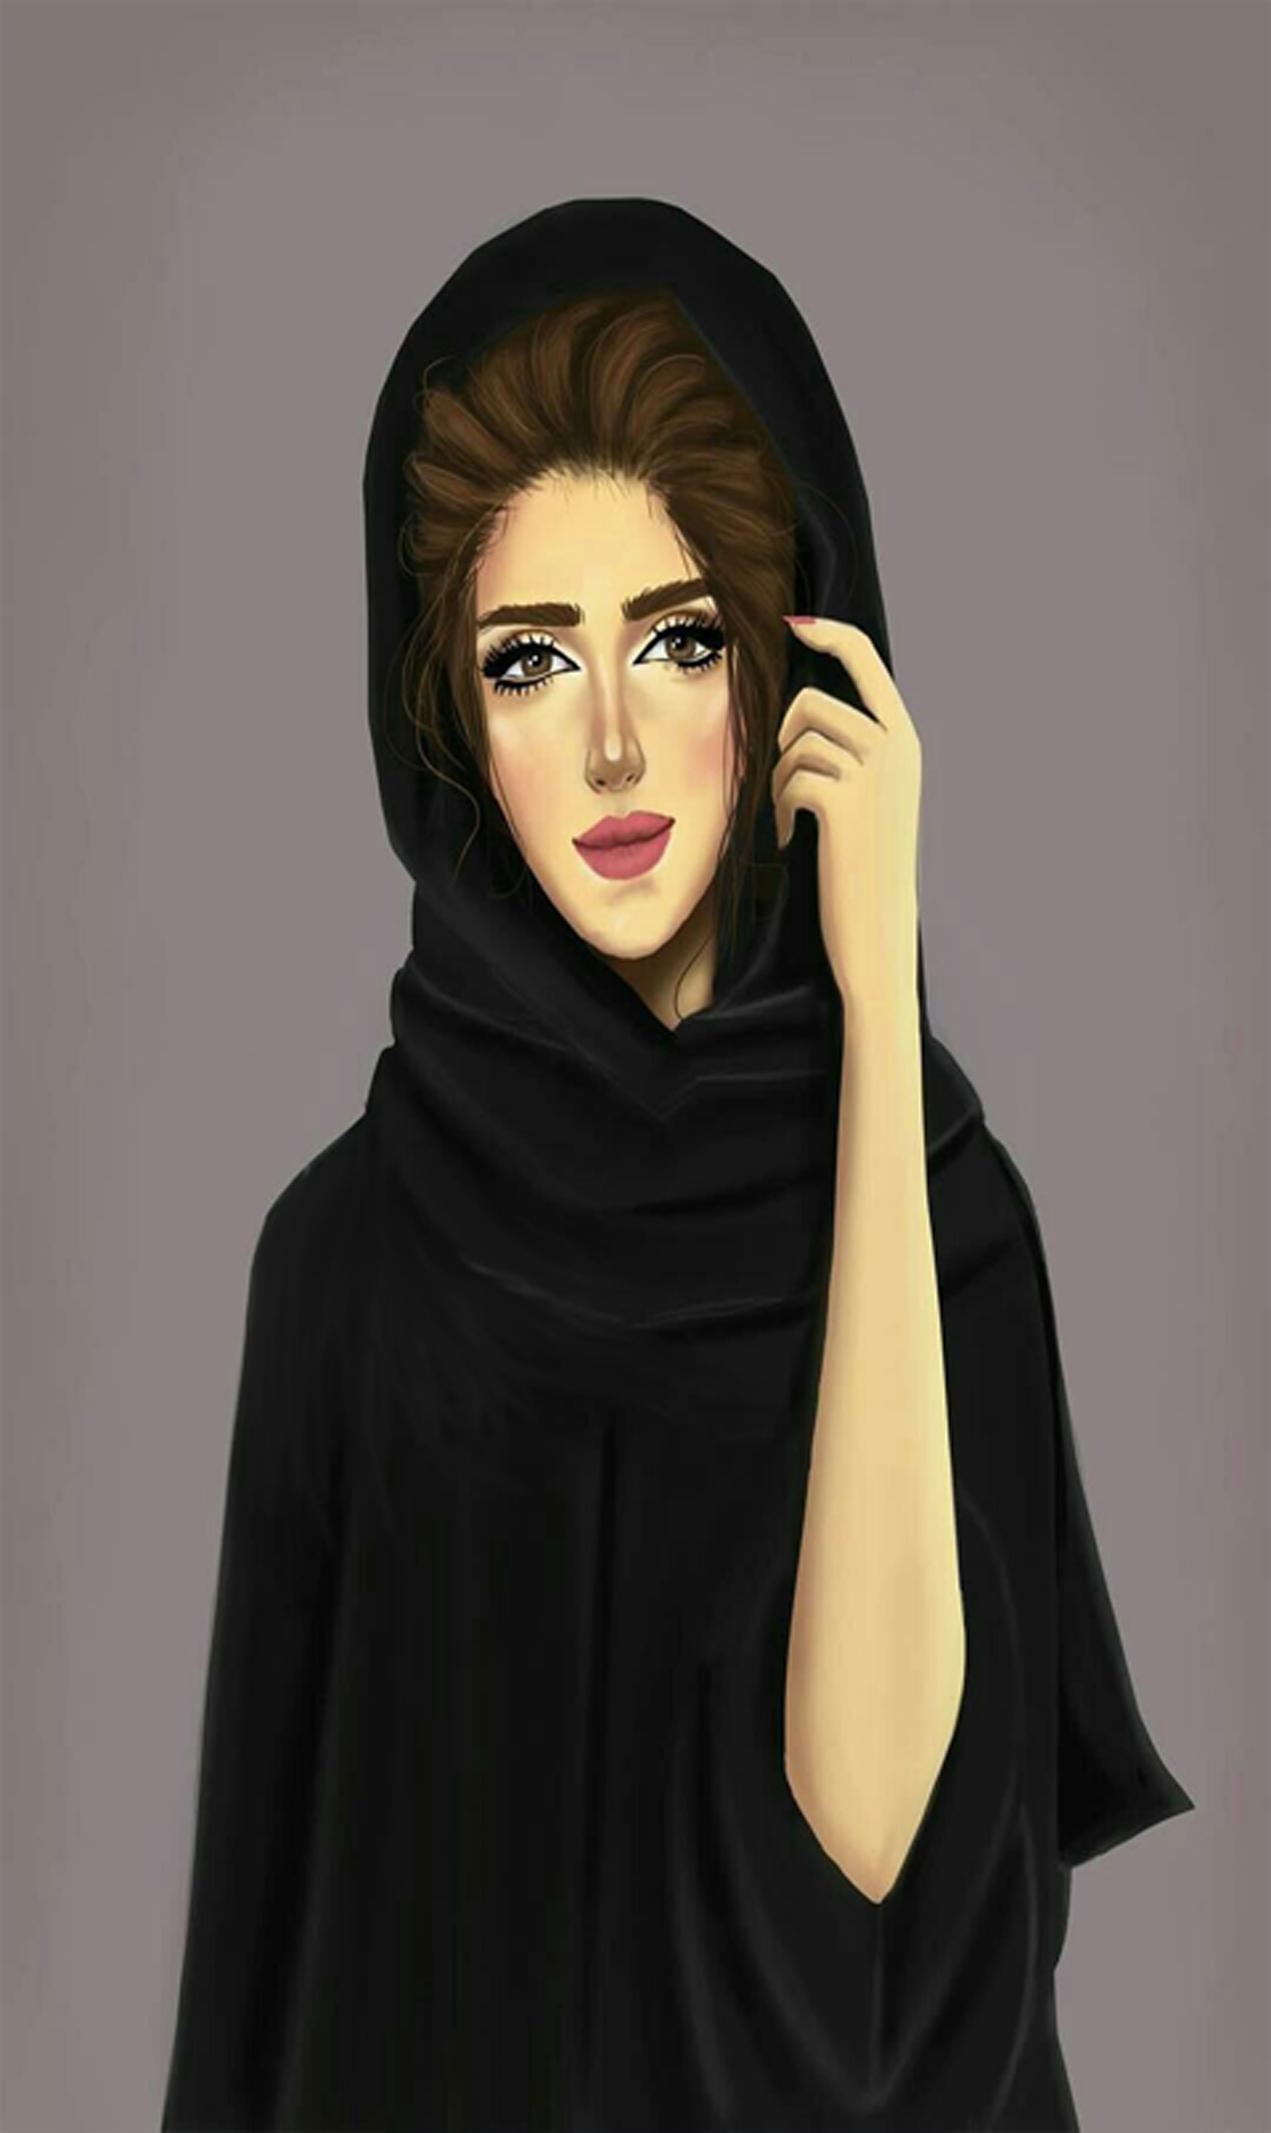 hijab girly wallpaper for Android